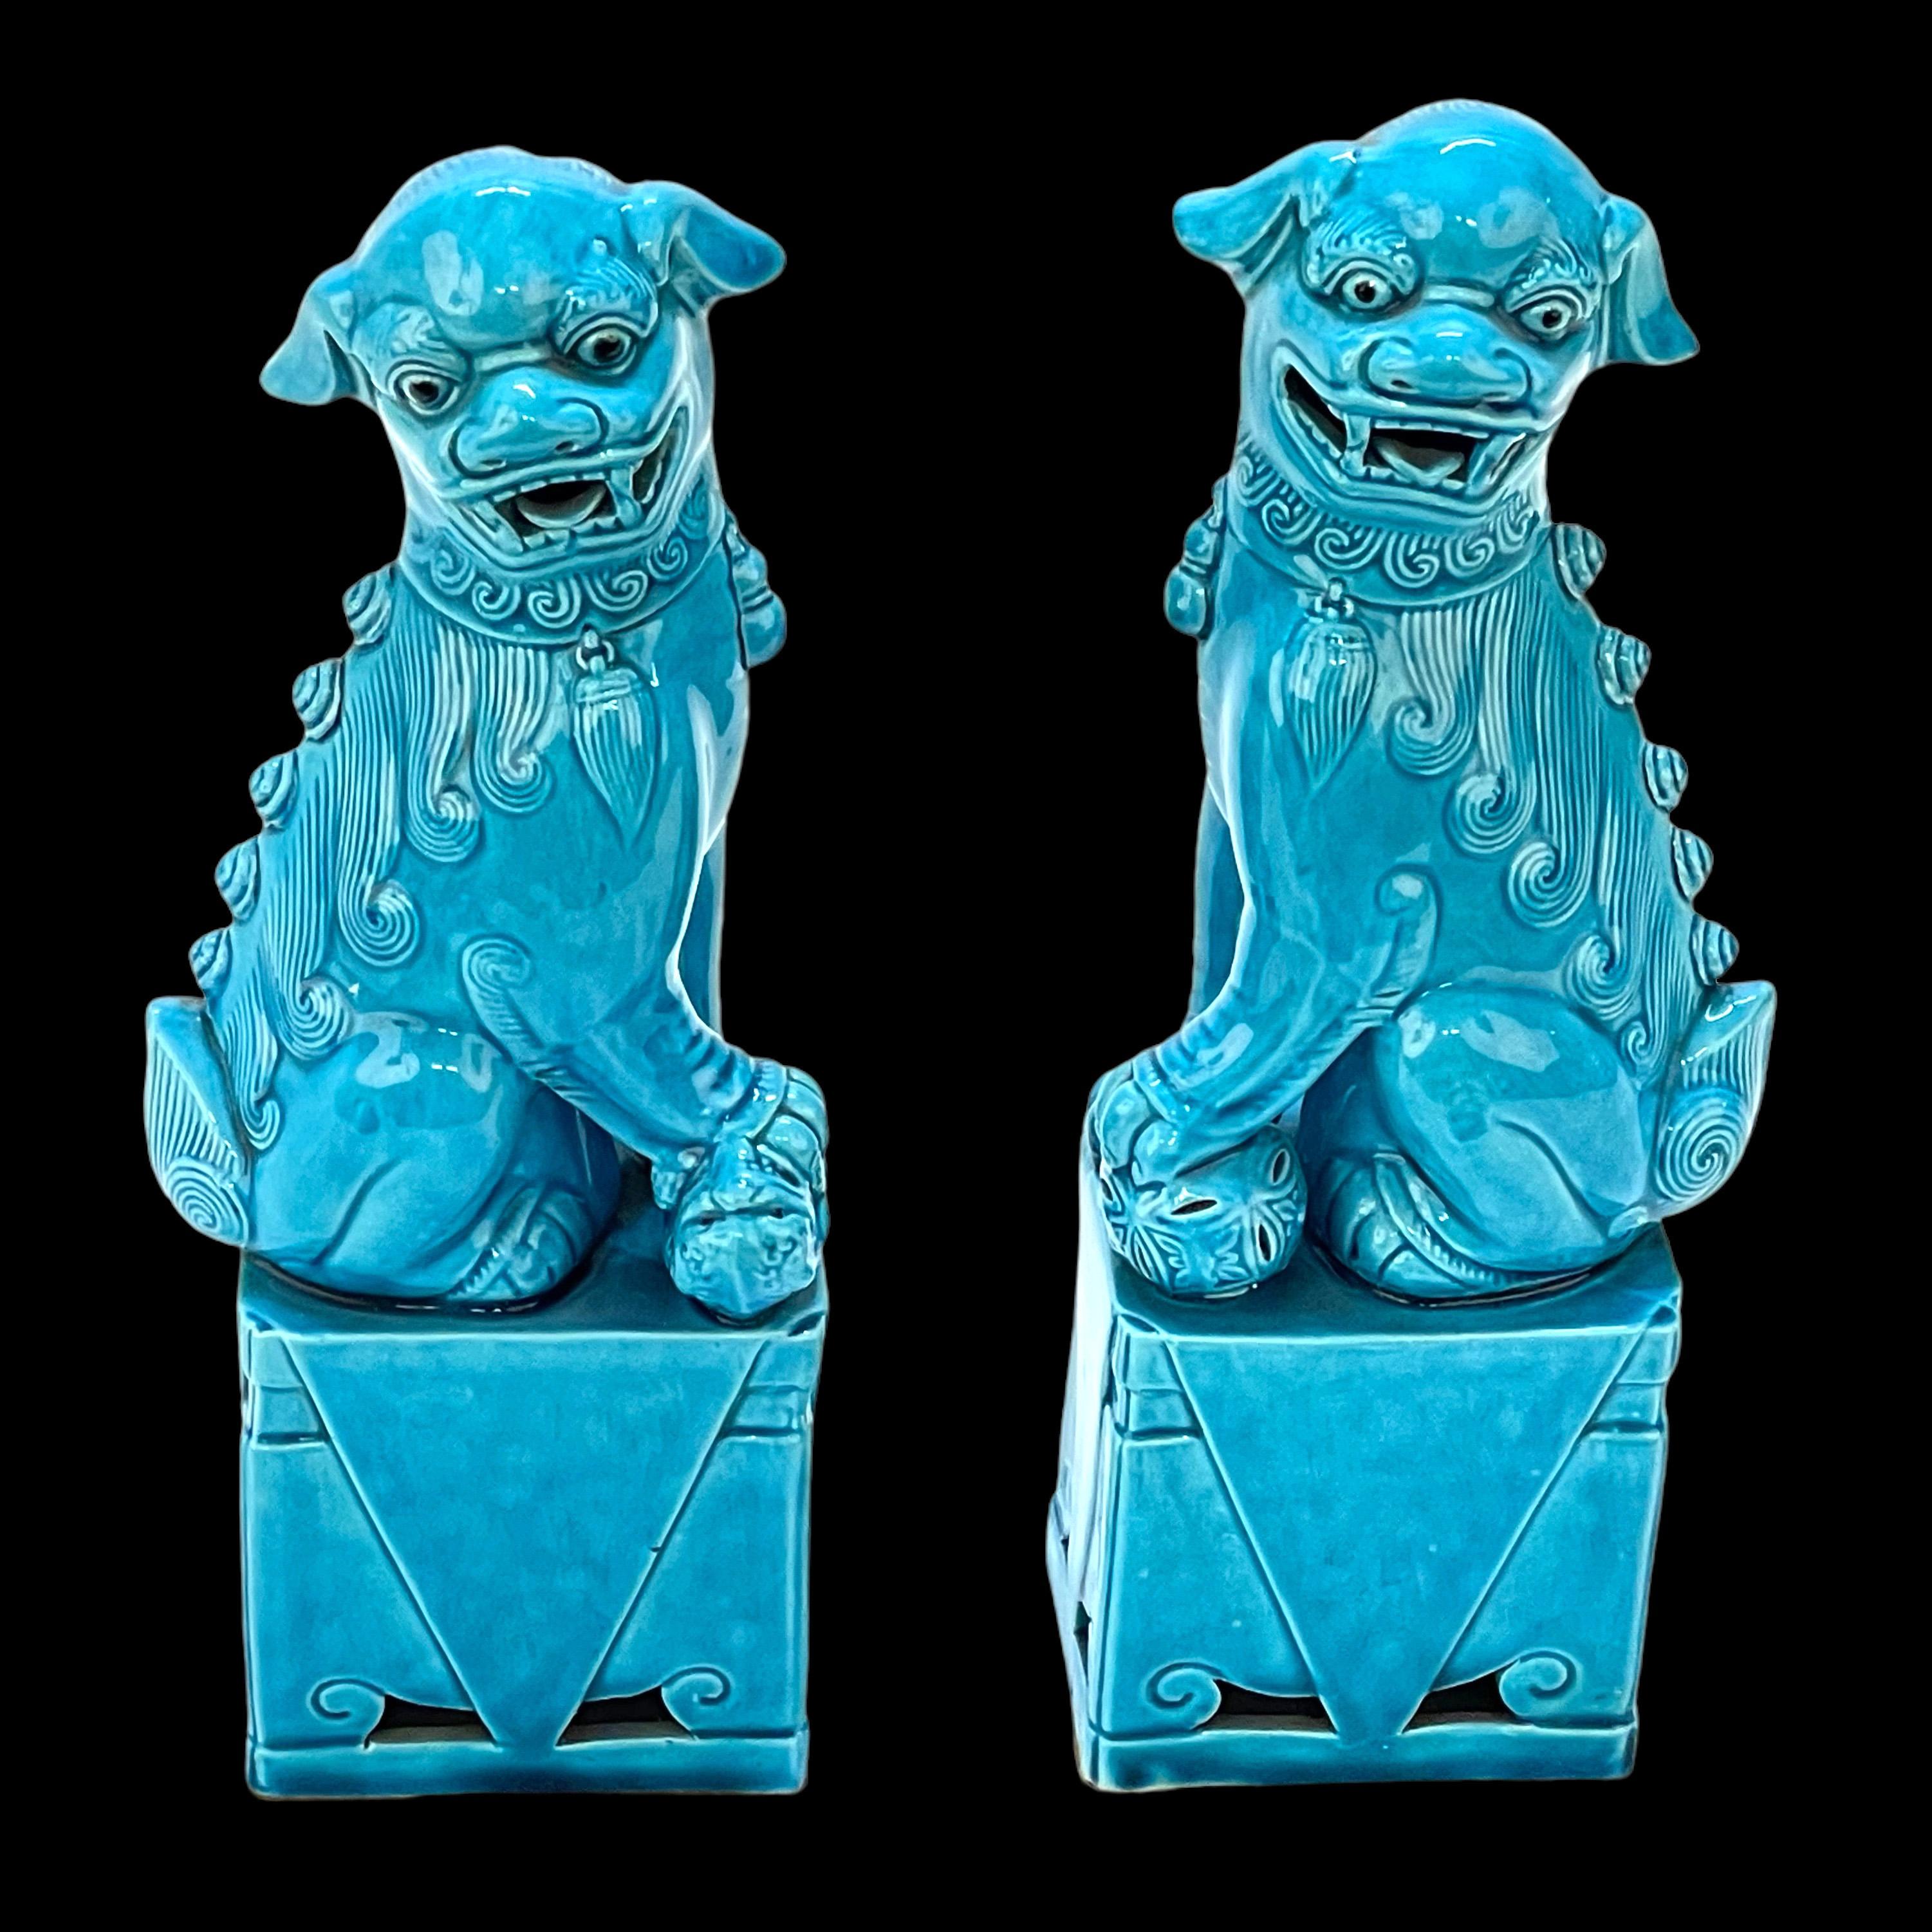 Excellent pair of mid-century turquoise blue ceramic foo dog sculptures, circa 1960s. These symbolic guardians present a beautiful turquoise hue and are in very good vintage condition with no chips or cracks.